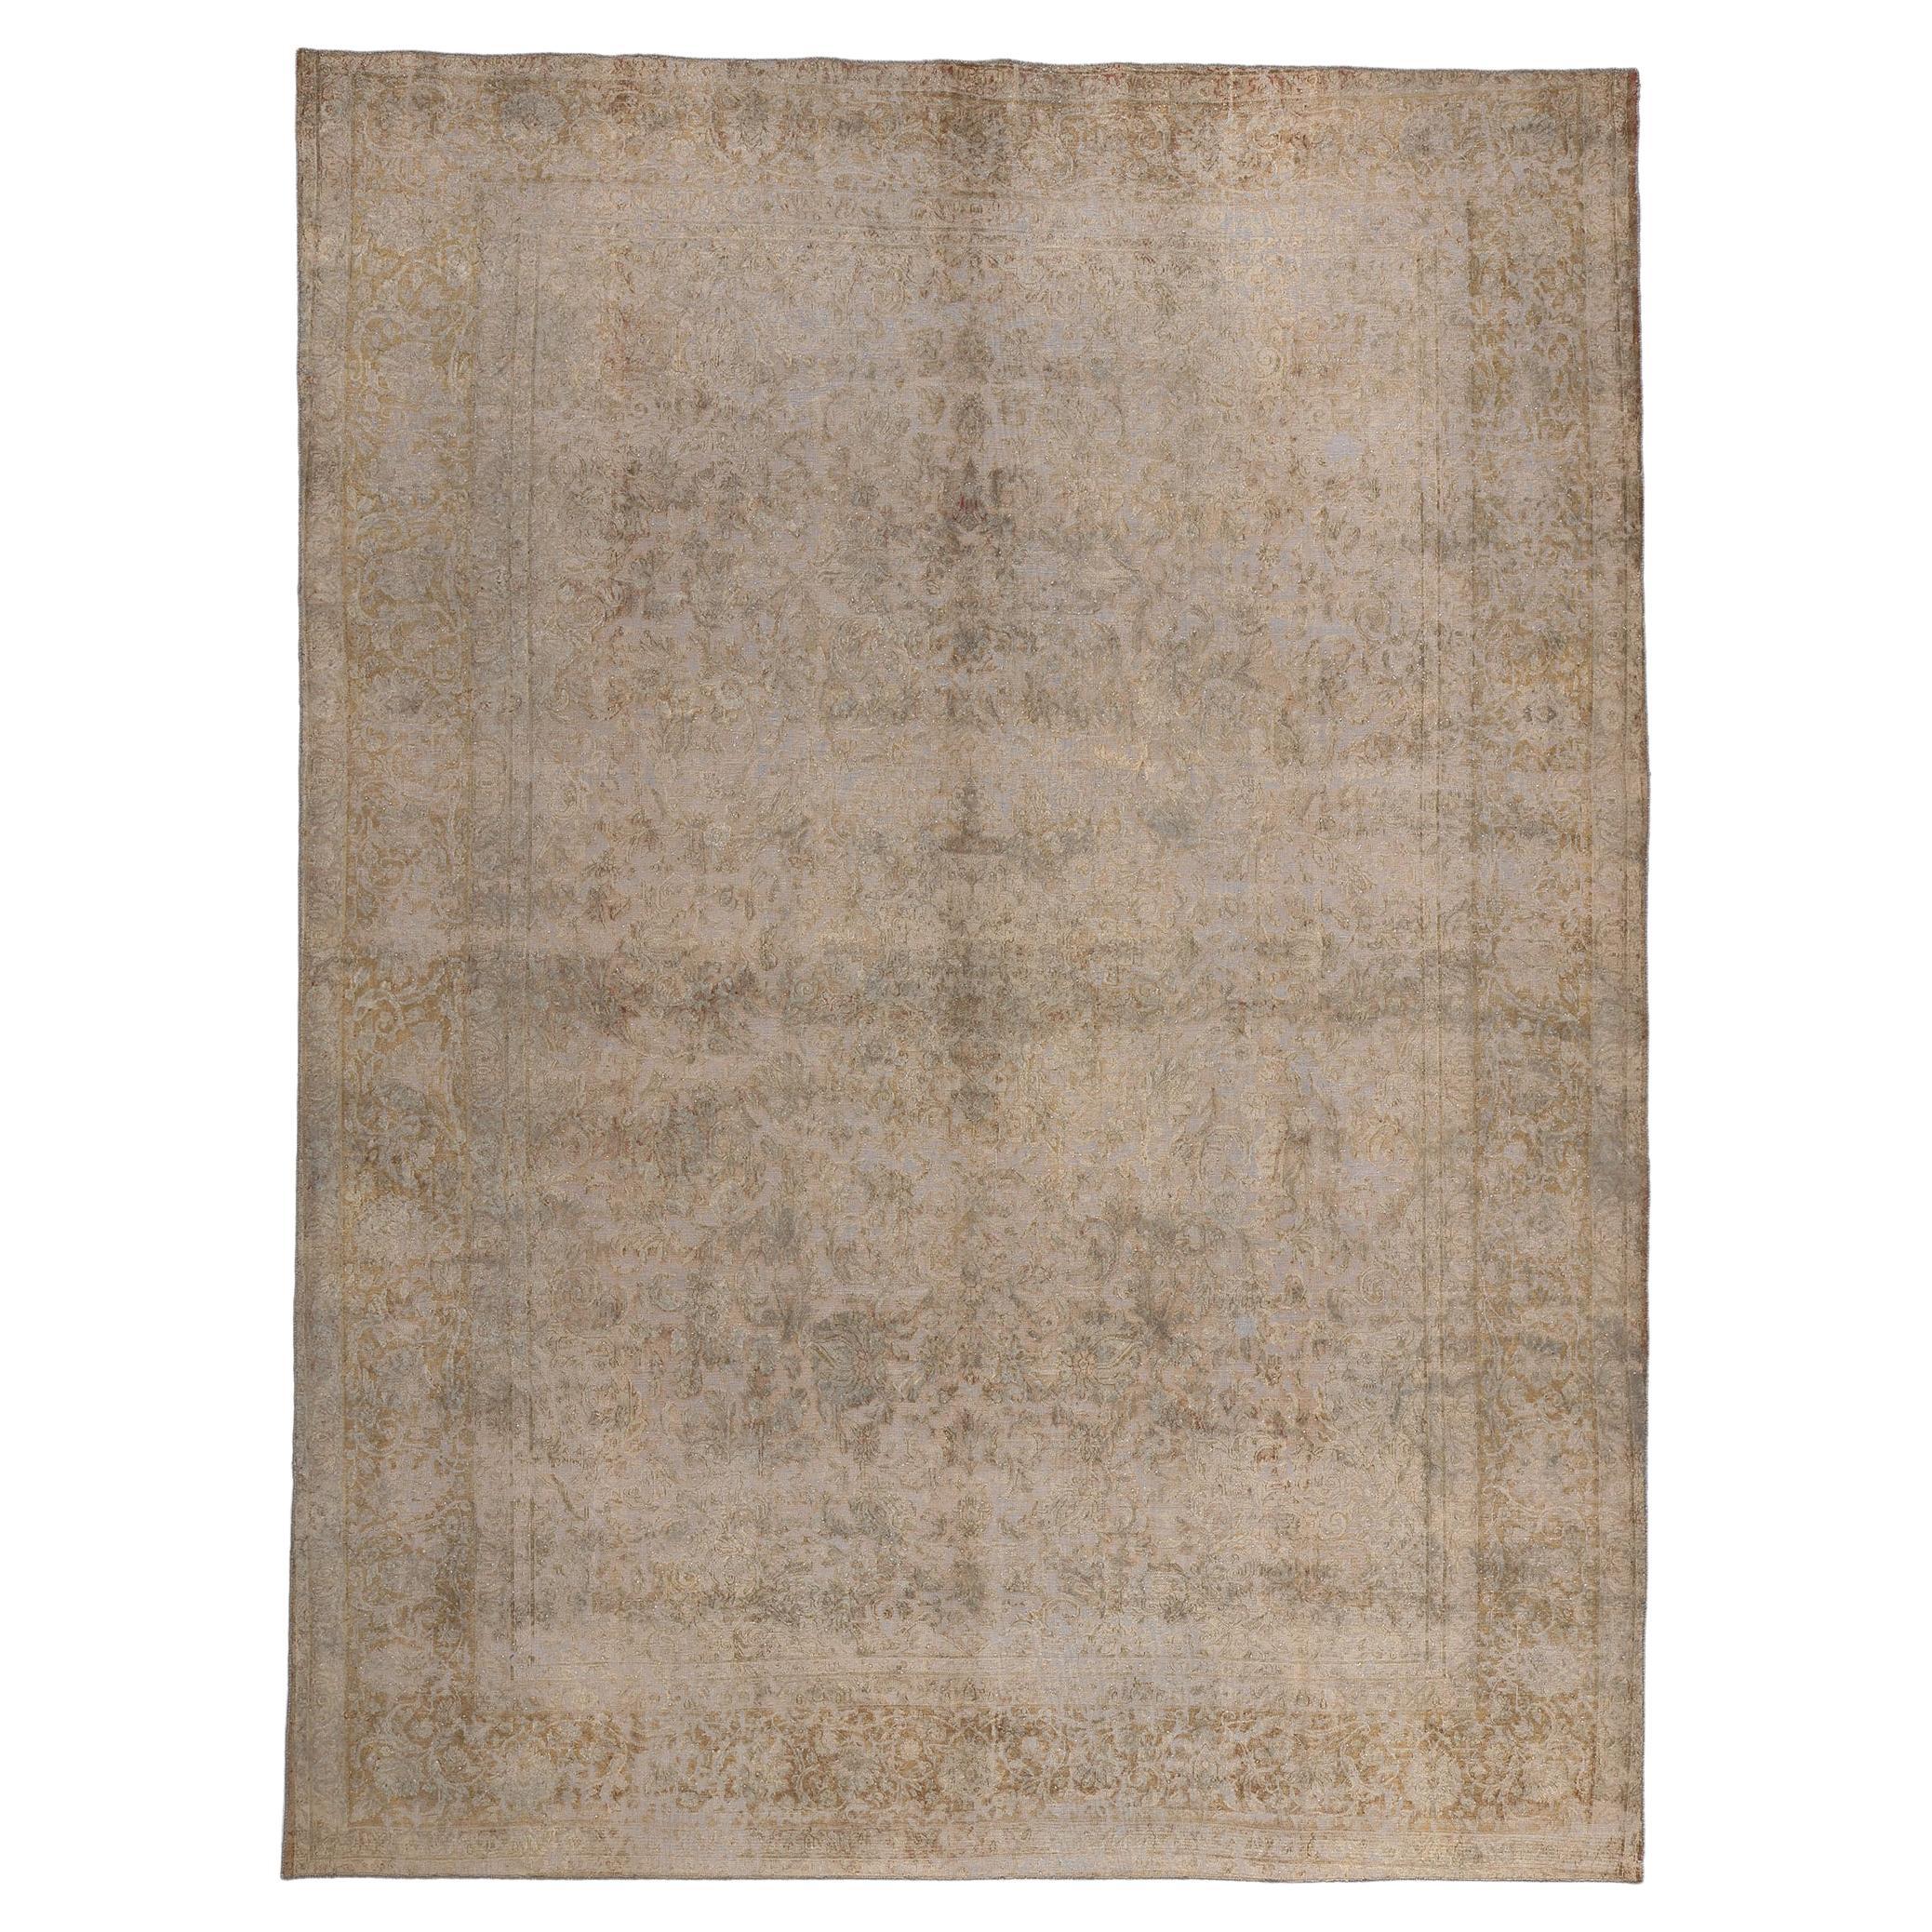 Vintage Turkish Overdyed Rug, French Industrial Meets Quiet Sophistication